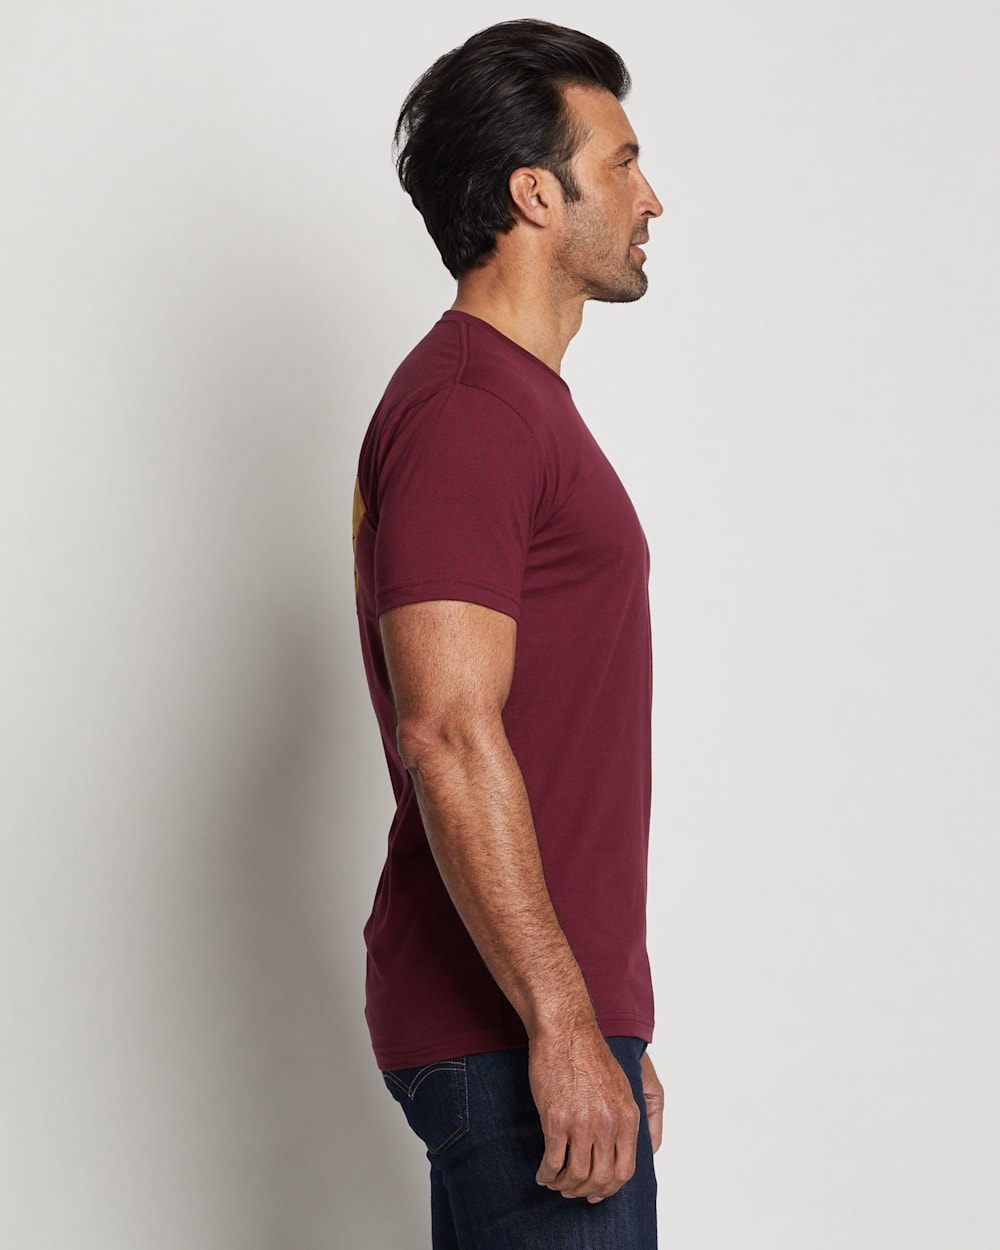 ALTERNATE VIEW OF MEN'S MISSION TRAILS DIAMOND GRAPHIC TEE IN MAROON/MULTI image number 4